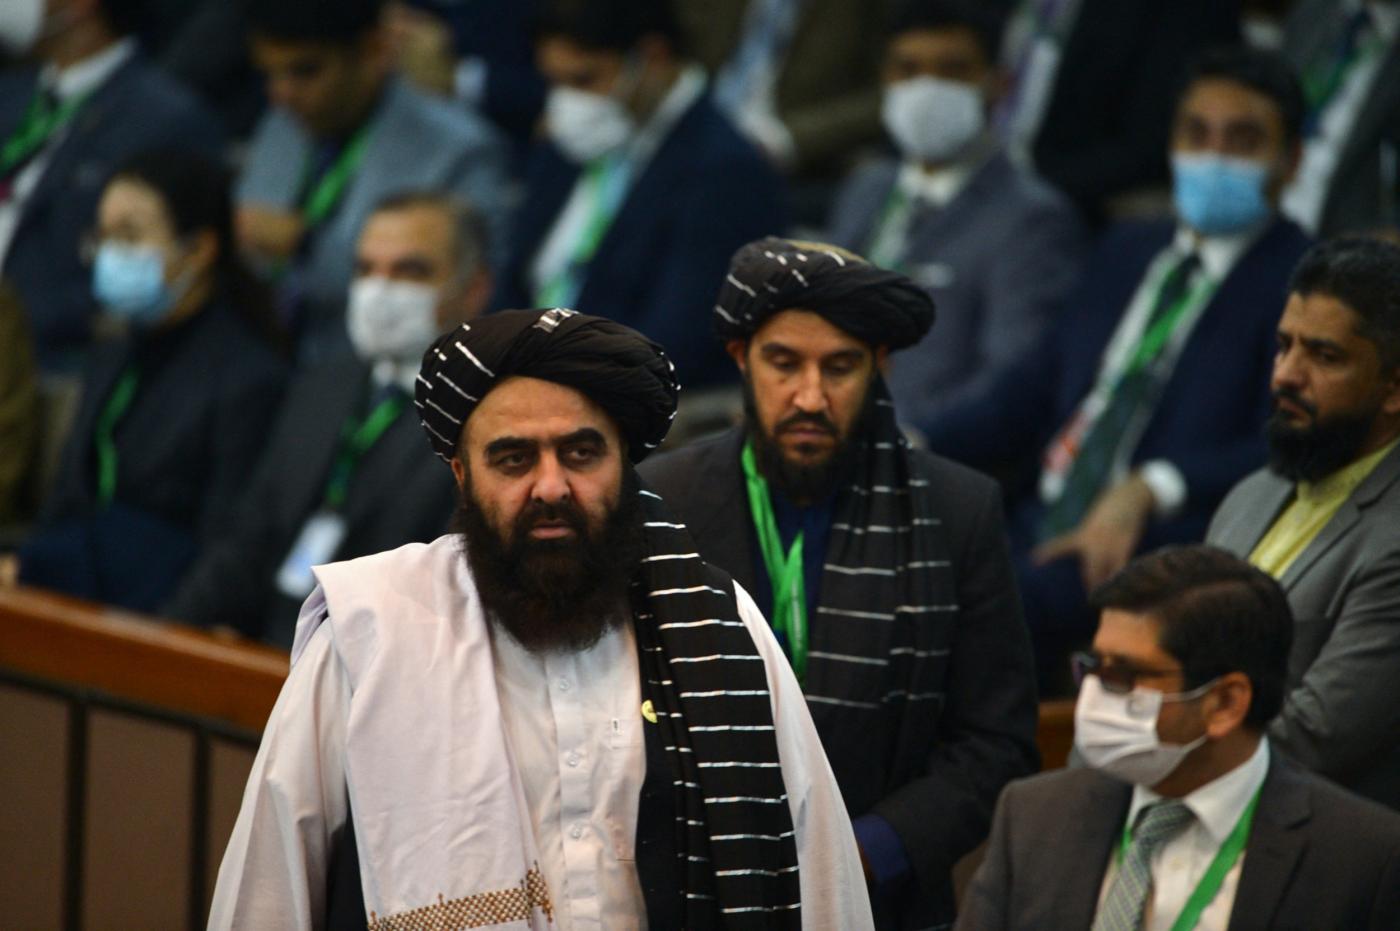 Taliban foreign minister in first trip to Iran- January 8, 2022
